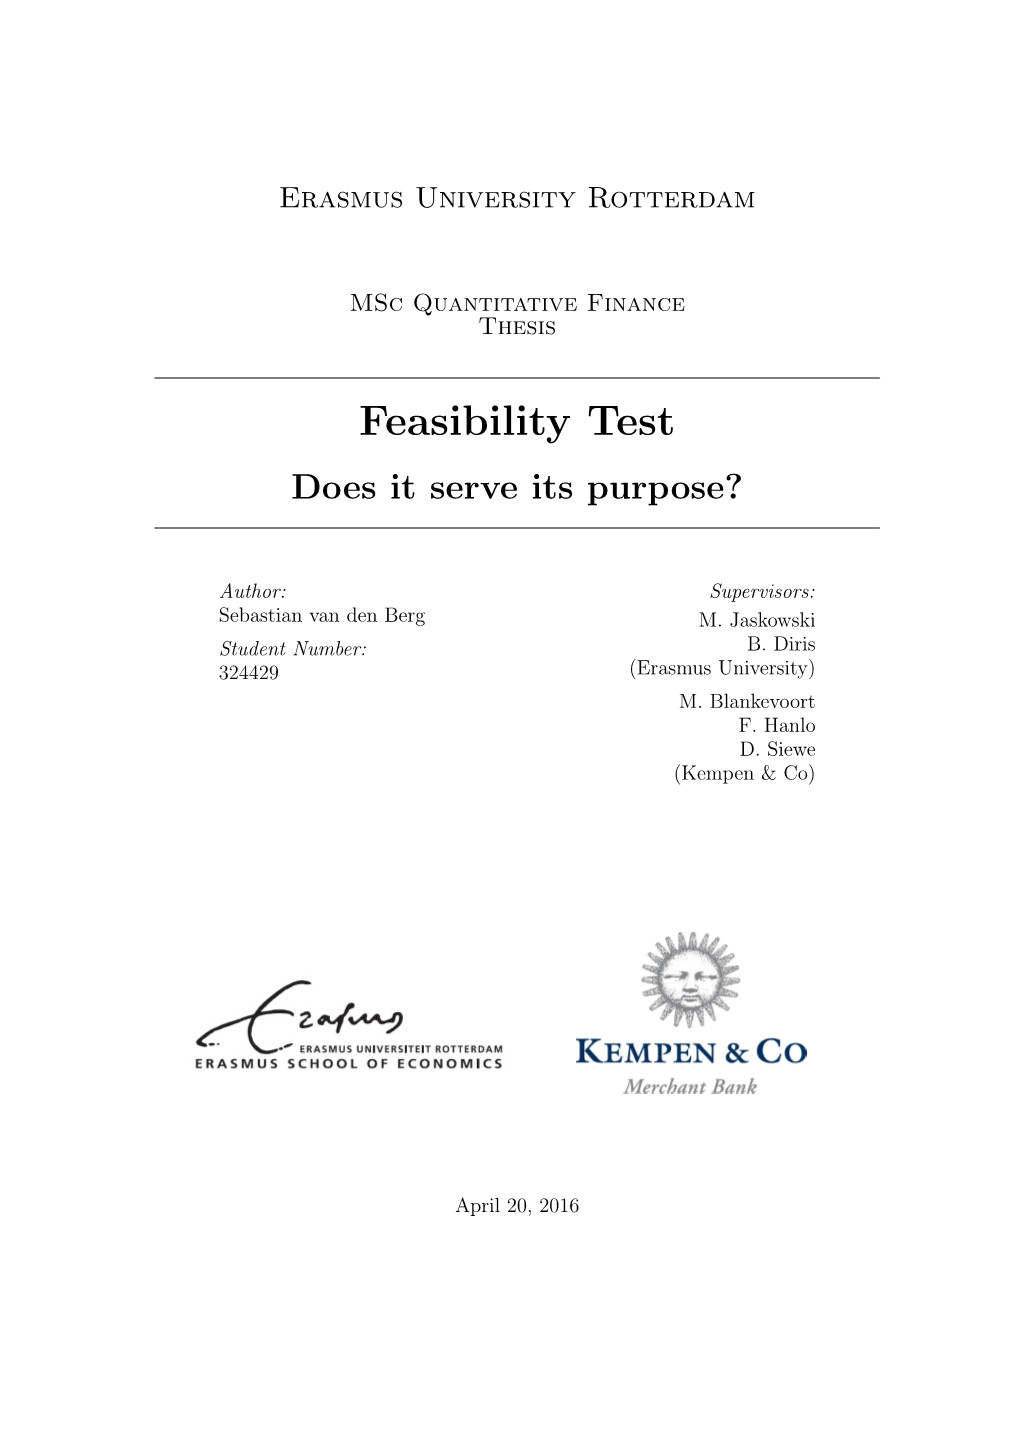 Feasibility Test Does It Serve Its Purpose?